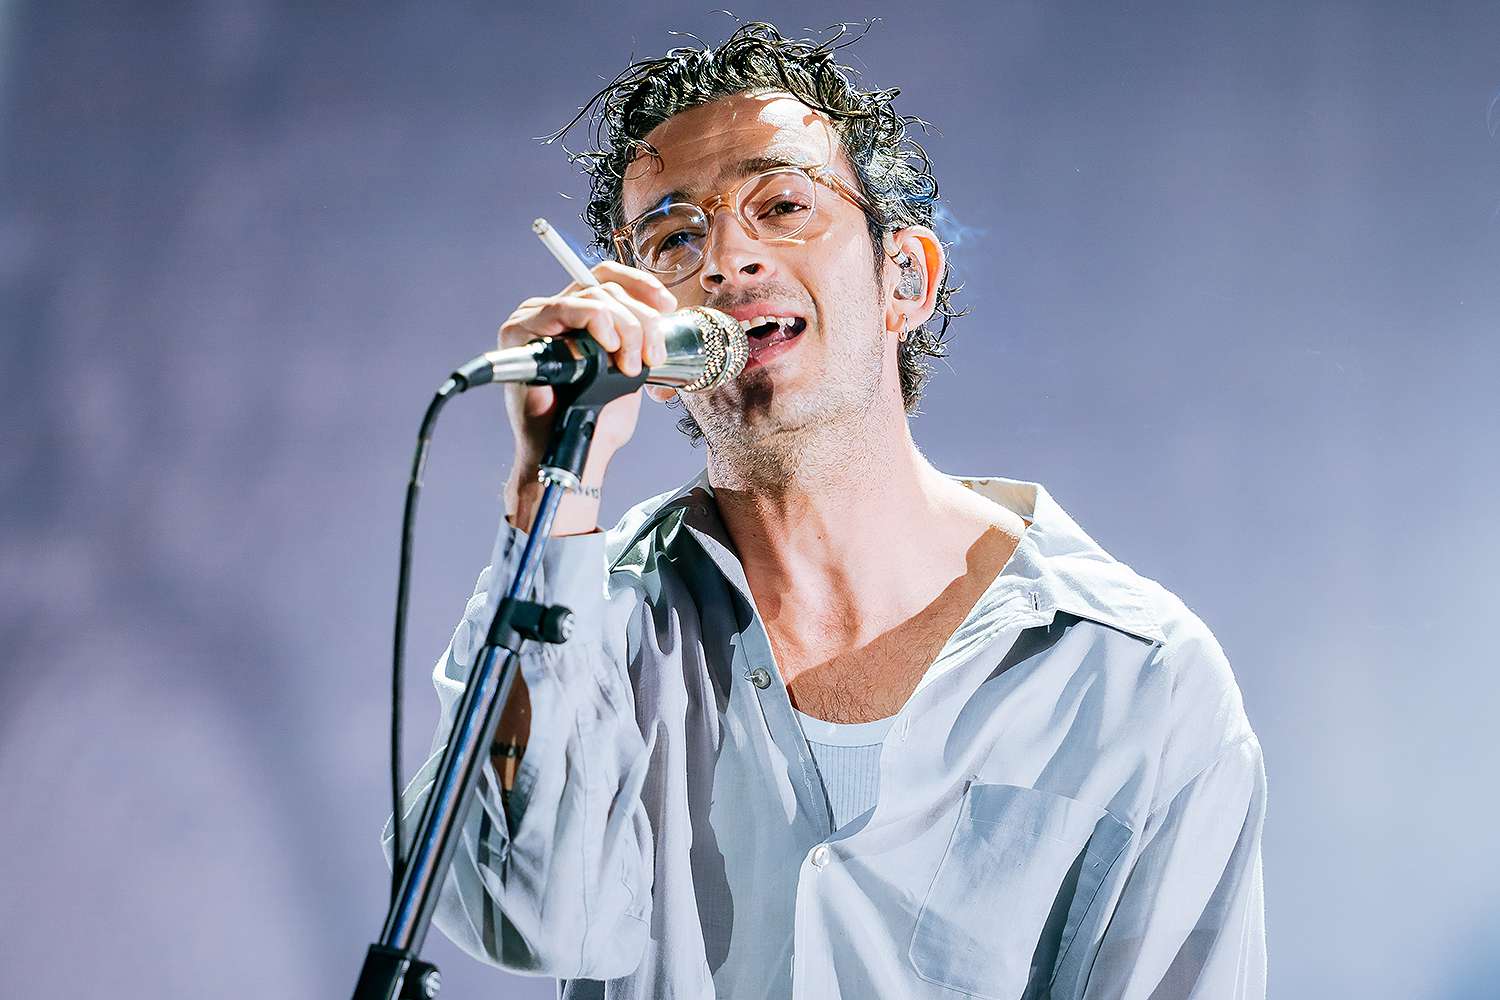 Malaysia halts music fest after Matty Healy kisses bandmate on stage